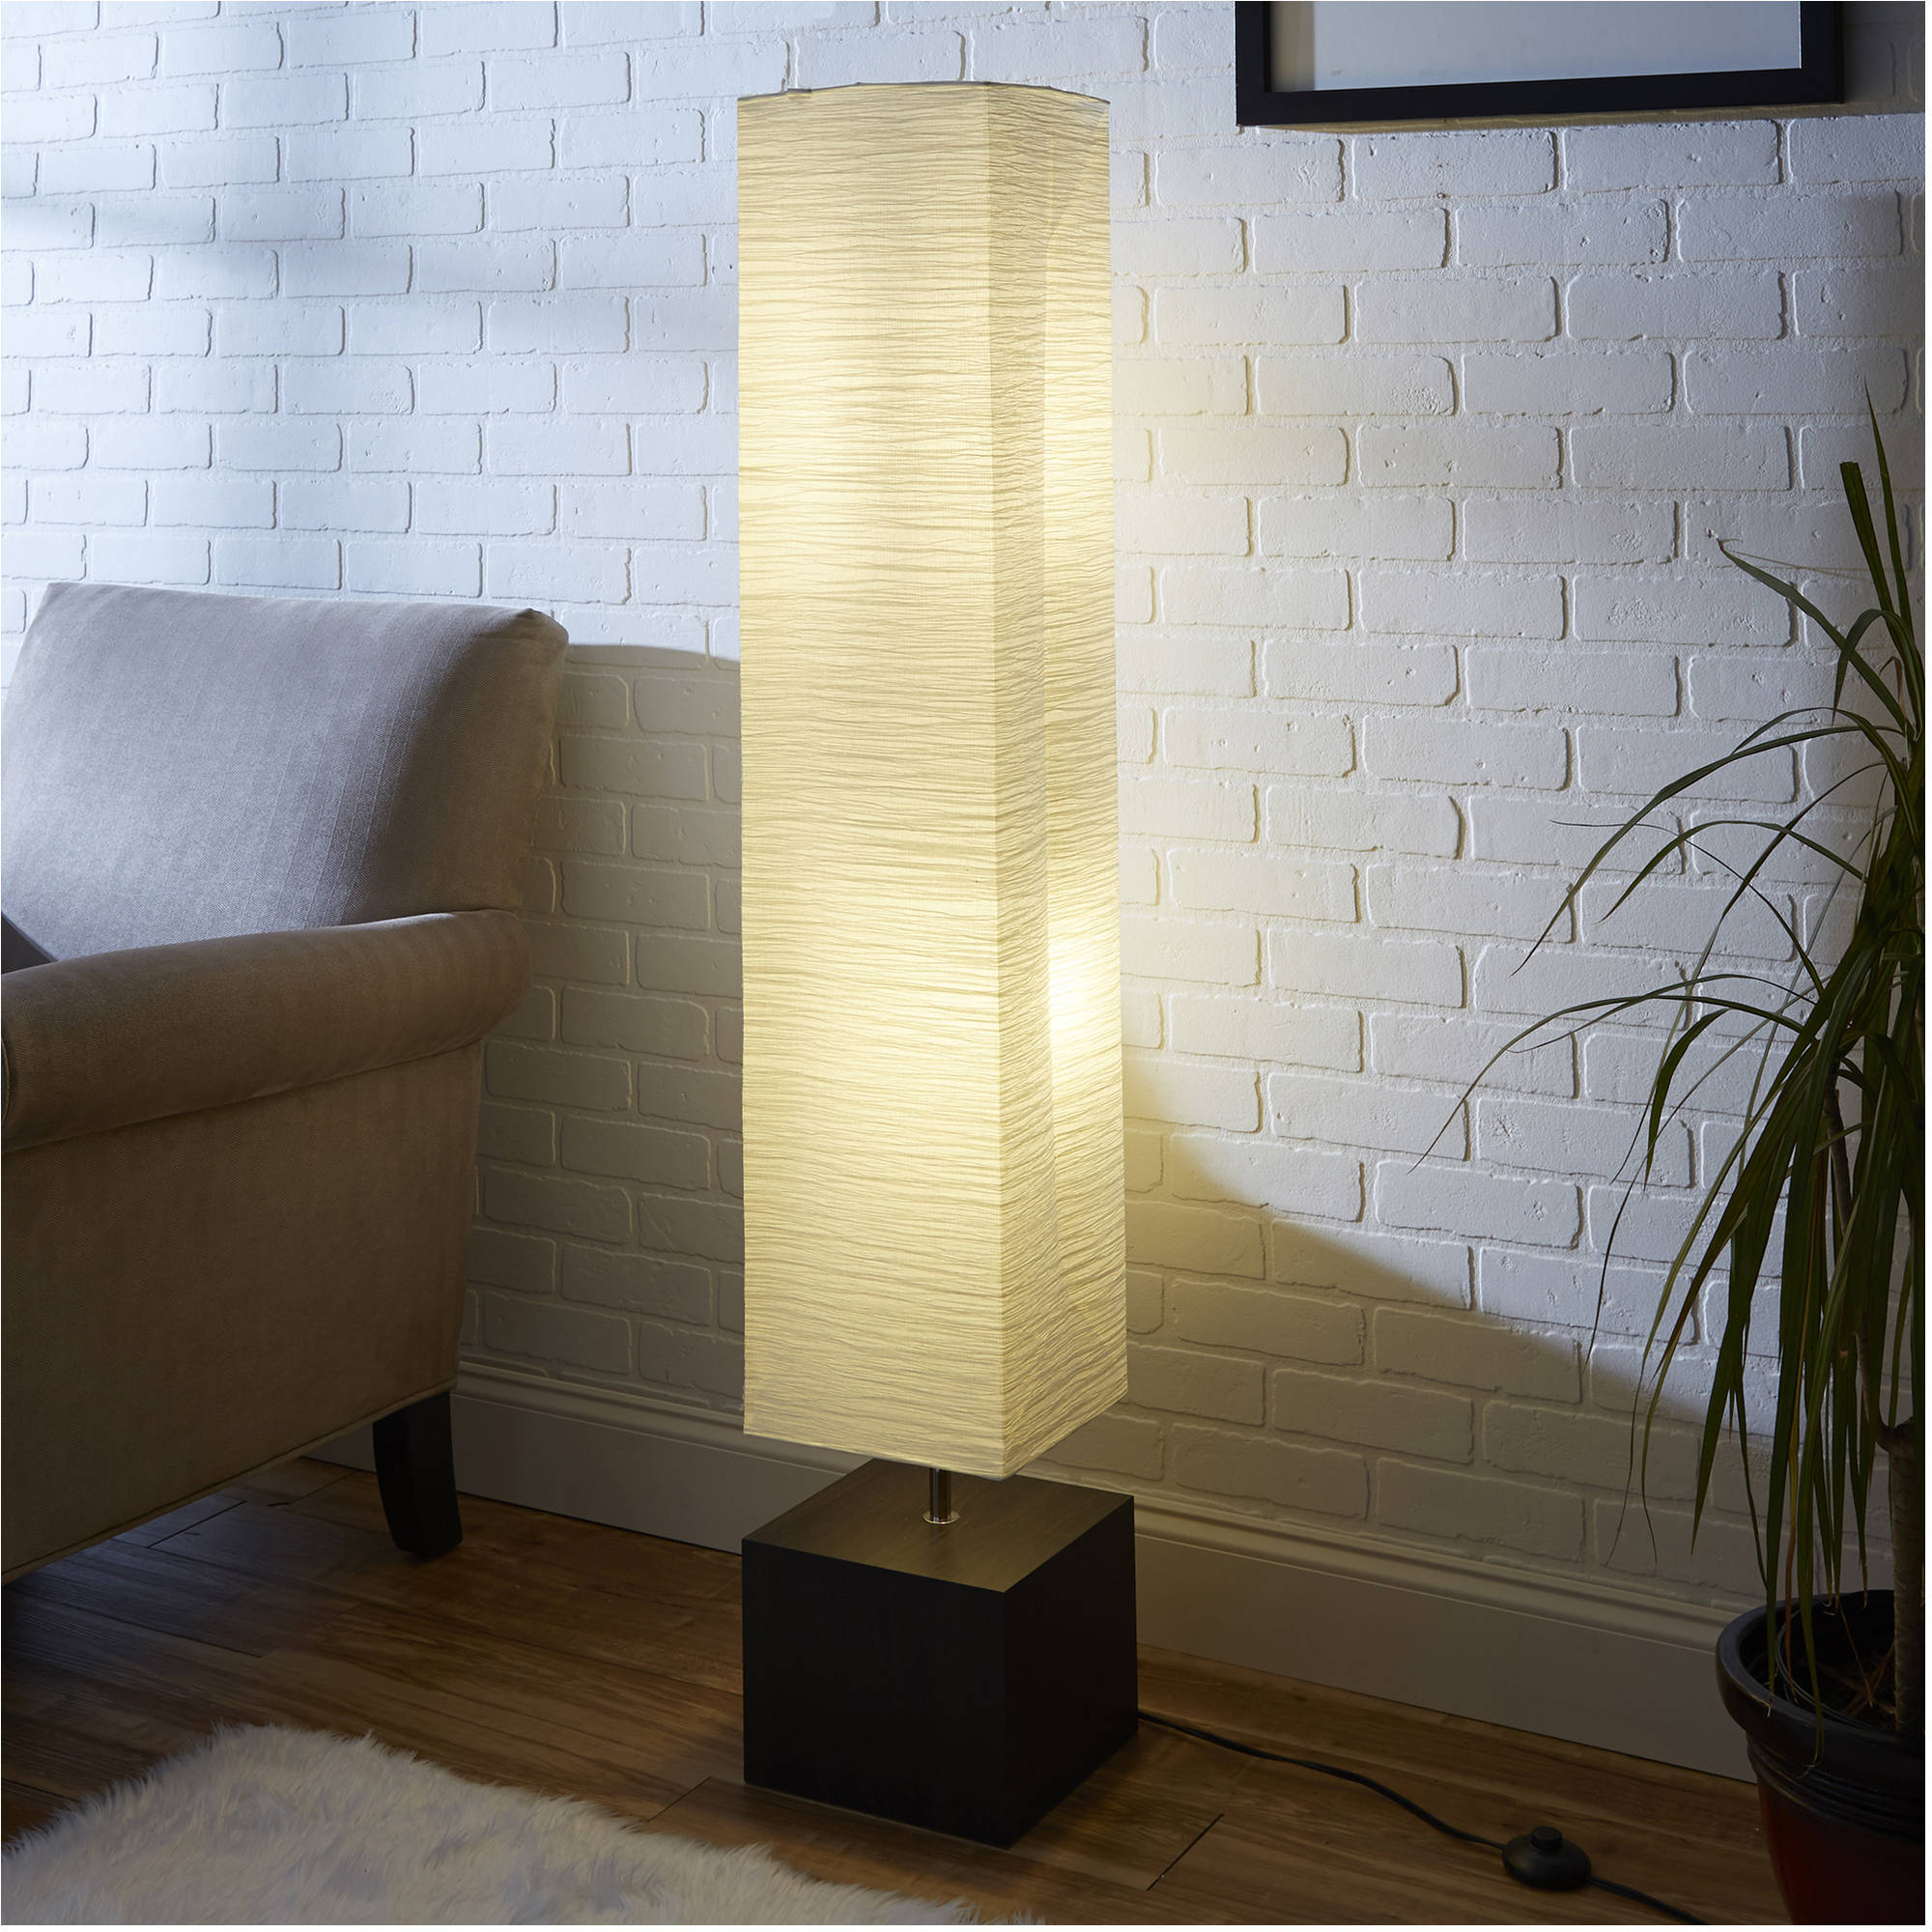 Details About Modern 58 Square Rice Paper Floor Lamp Wood Finish Living Room Office Decor New regarding size 2000 X 2000